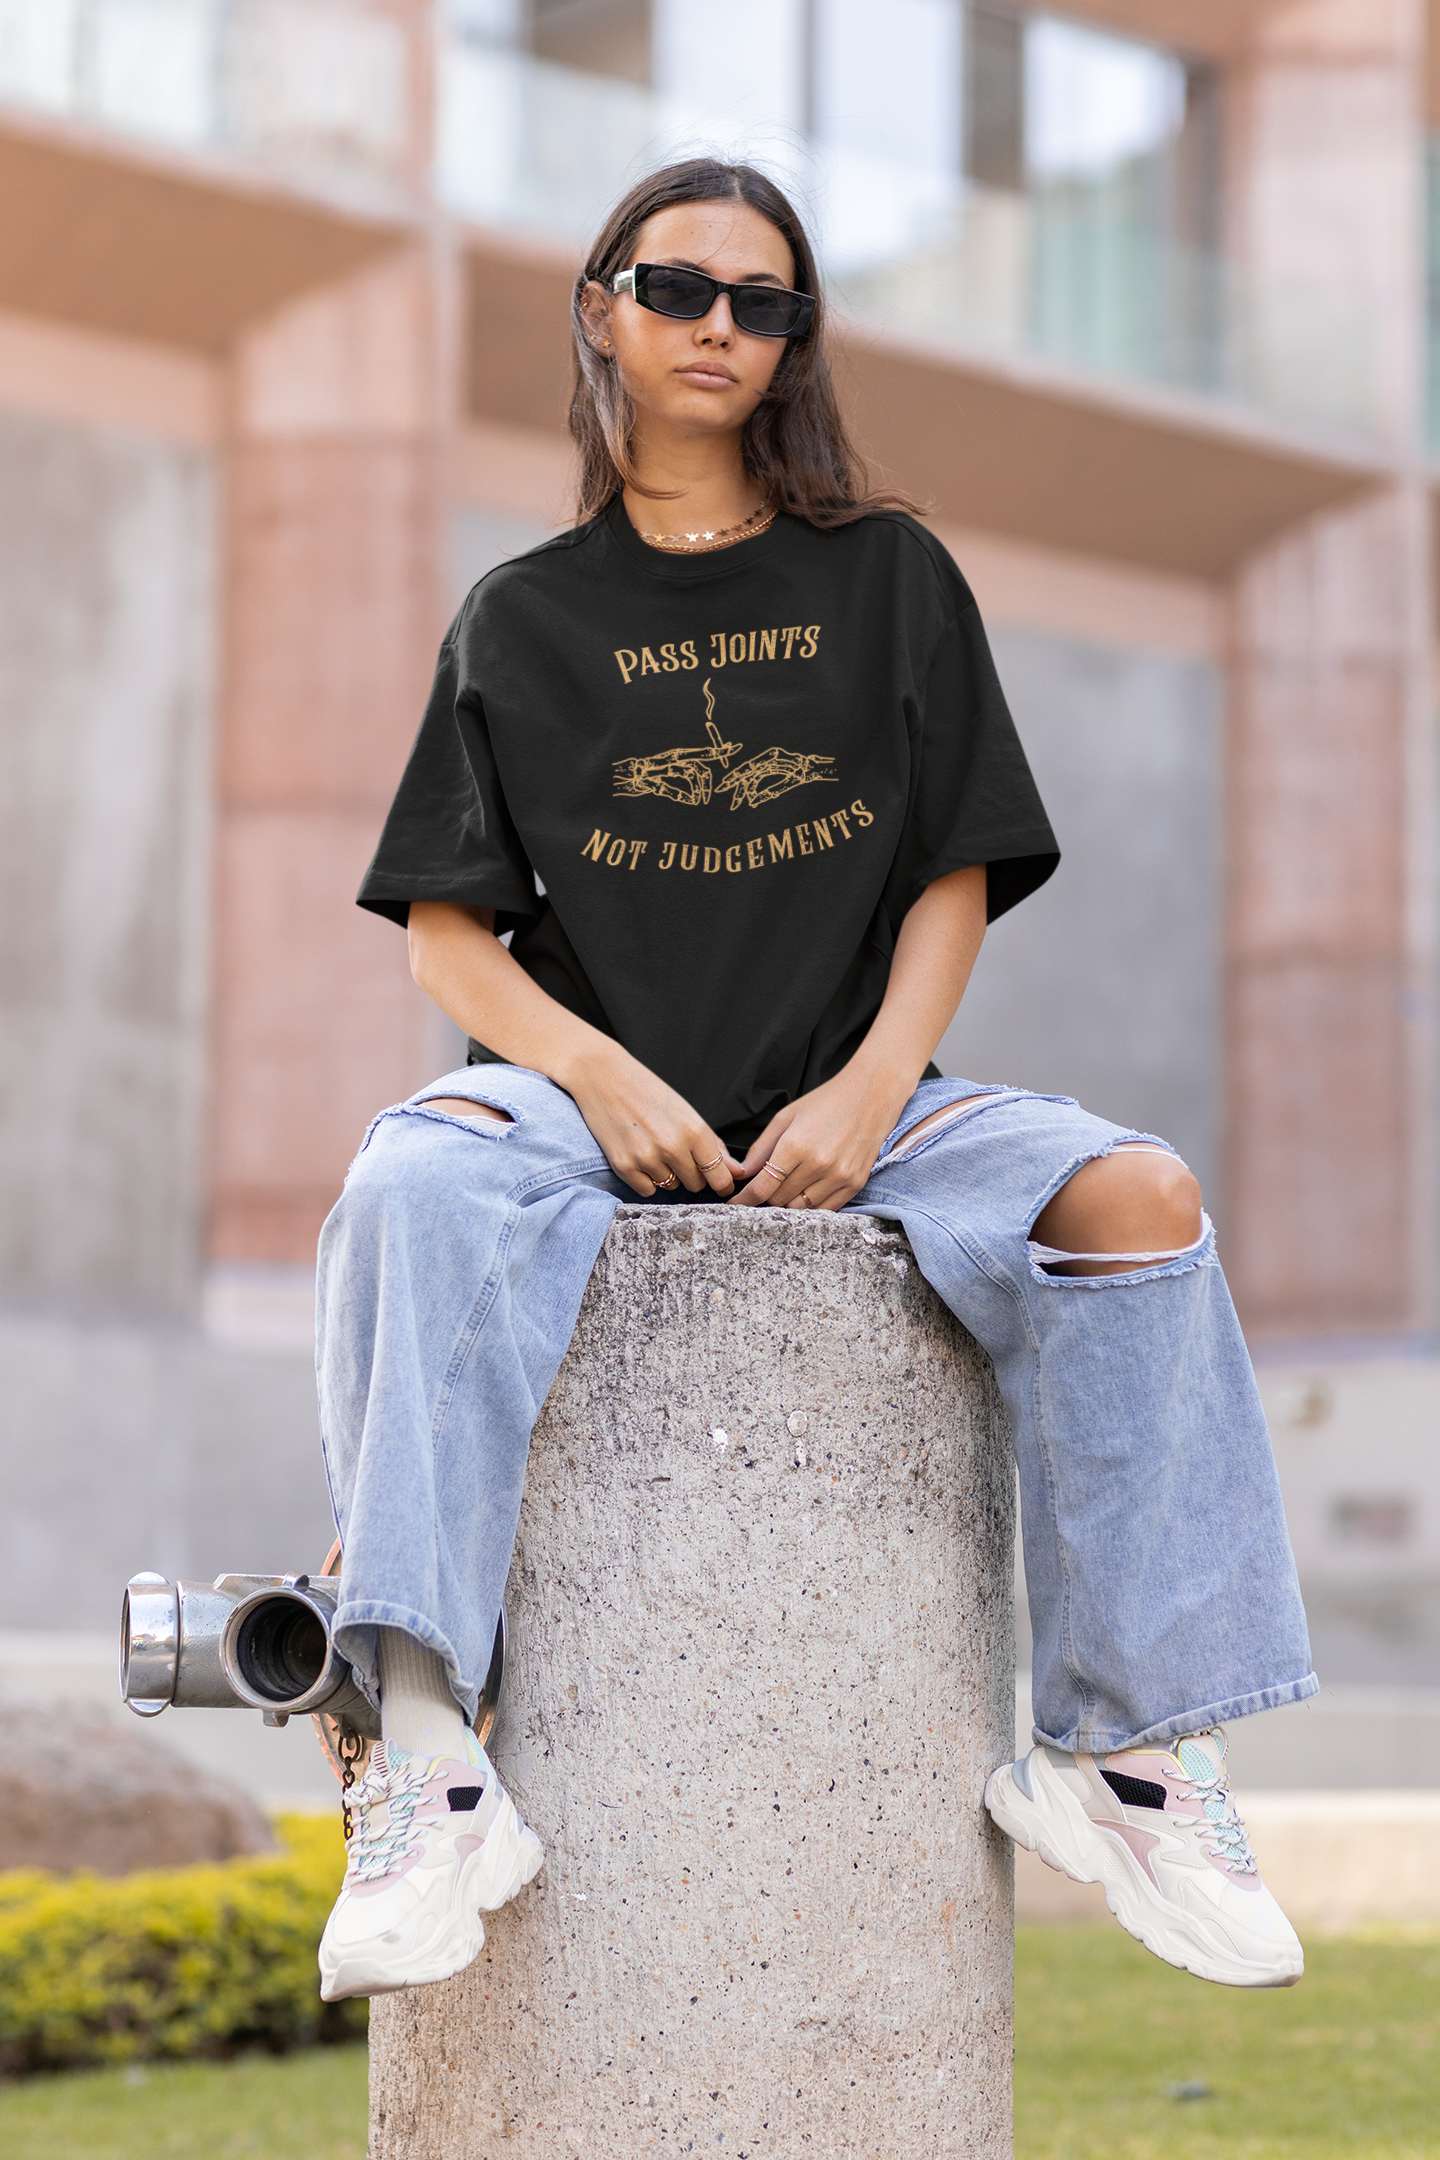 Pass Joints Not Judgement Black Unisex Over-sized T-shirts